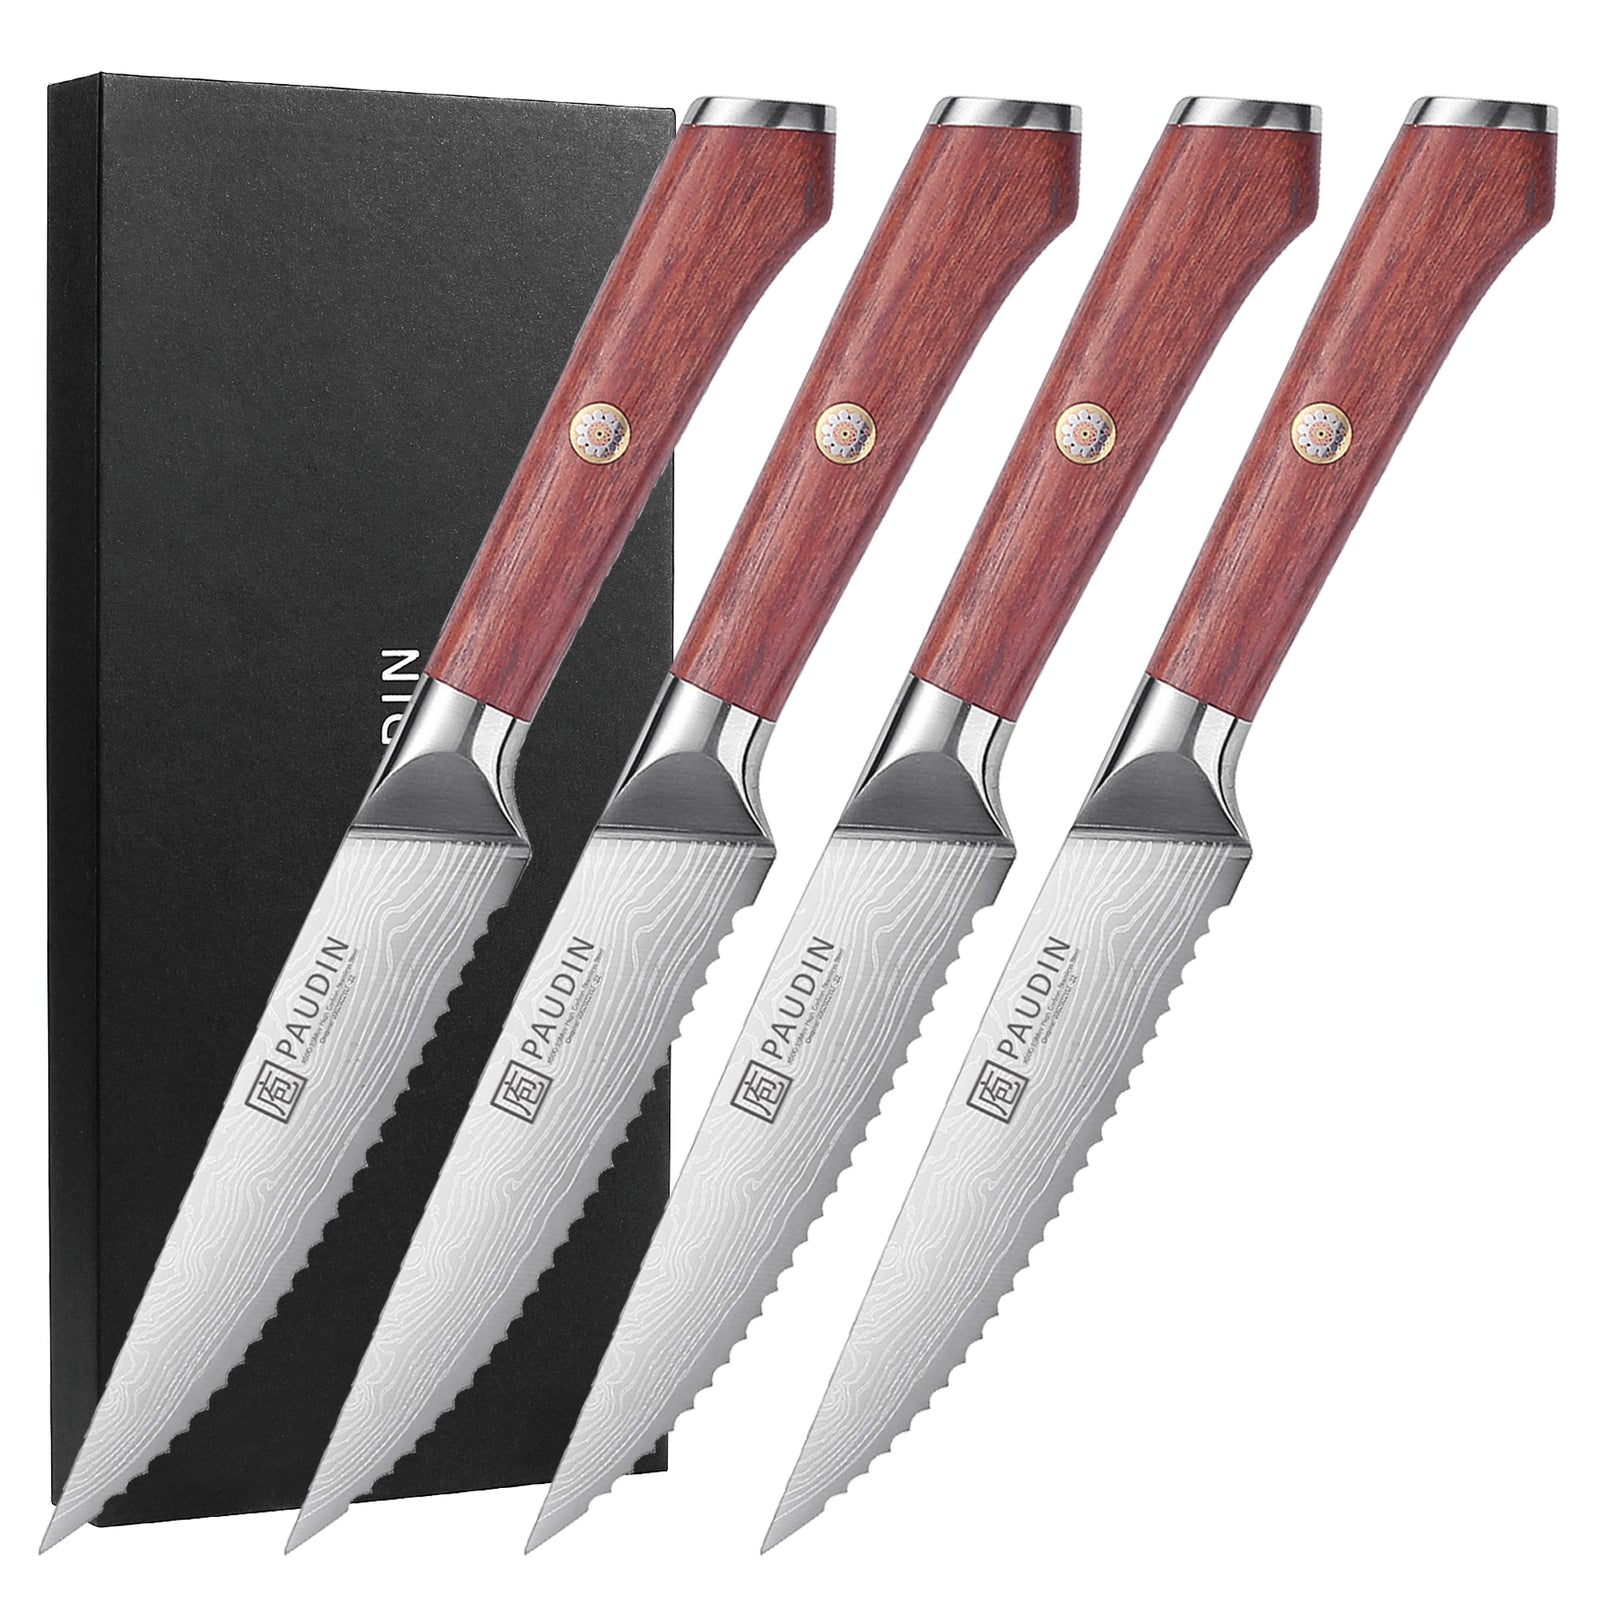  PAUDIN Kitchen Knife Set with Block, 14 Pieces Knife